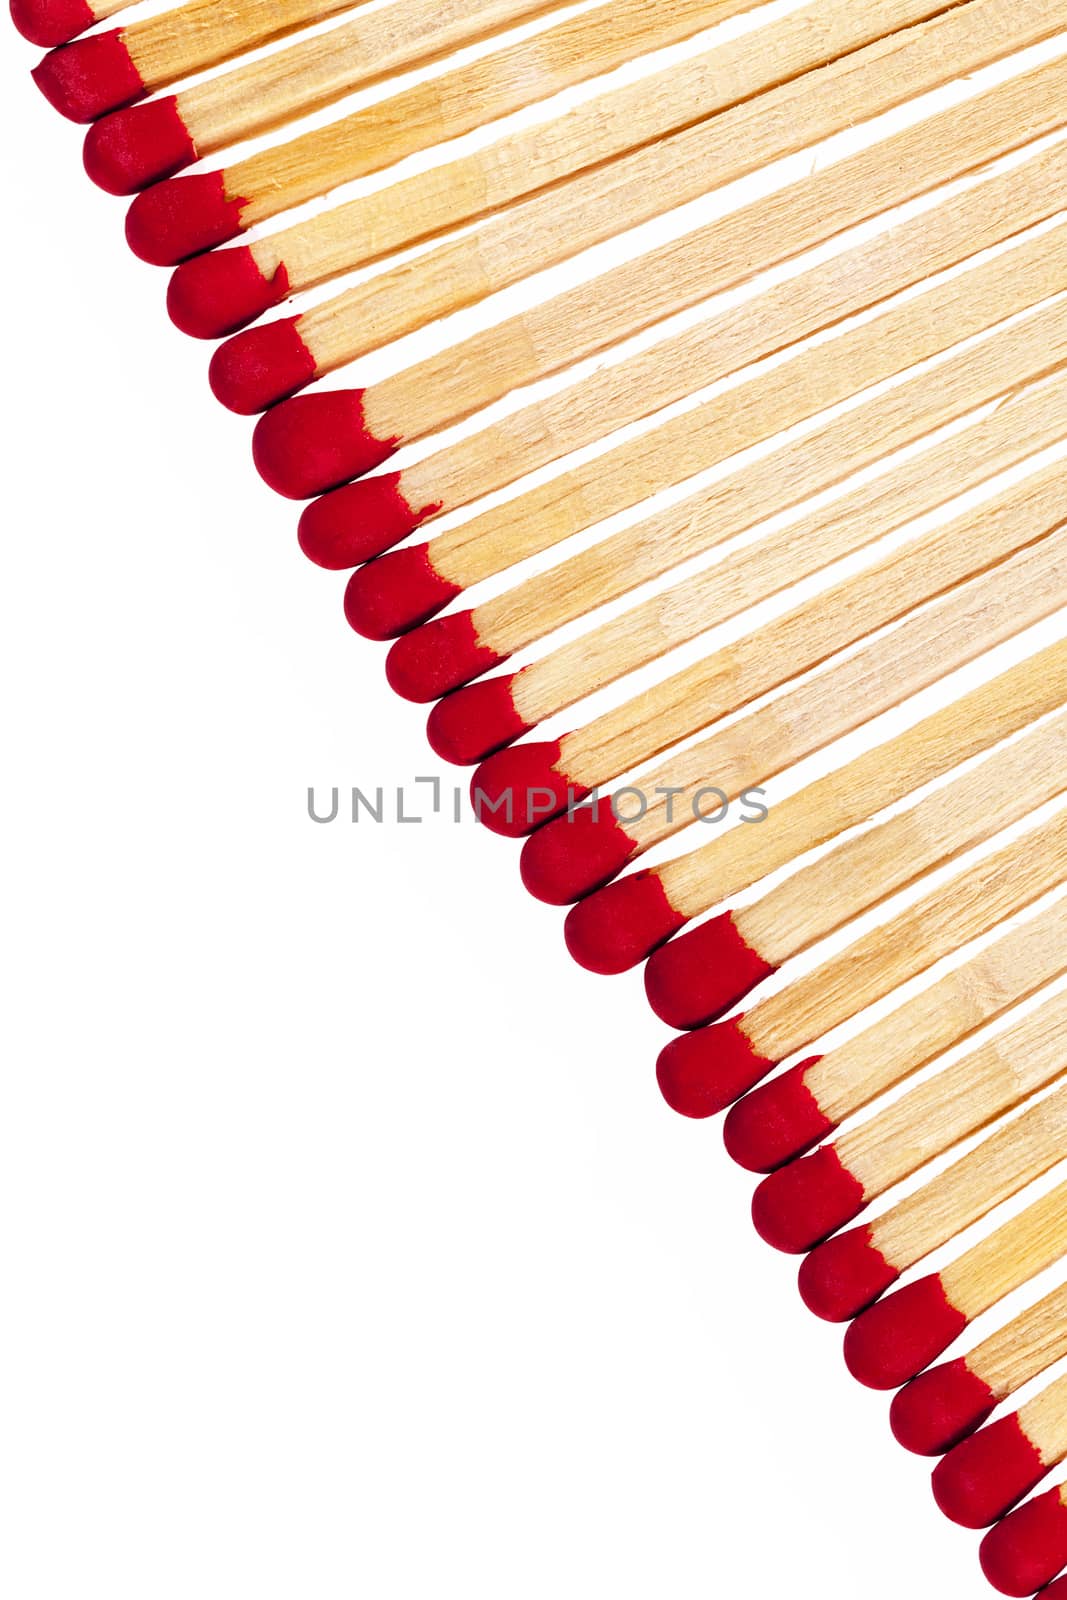 composition of matches with rad heads isolated on white background, close up